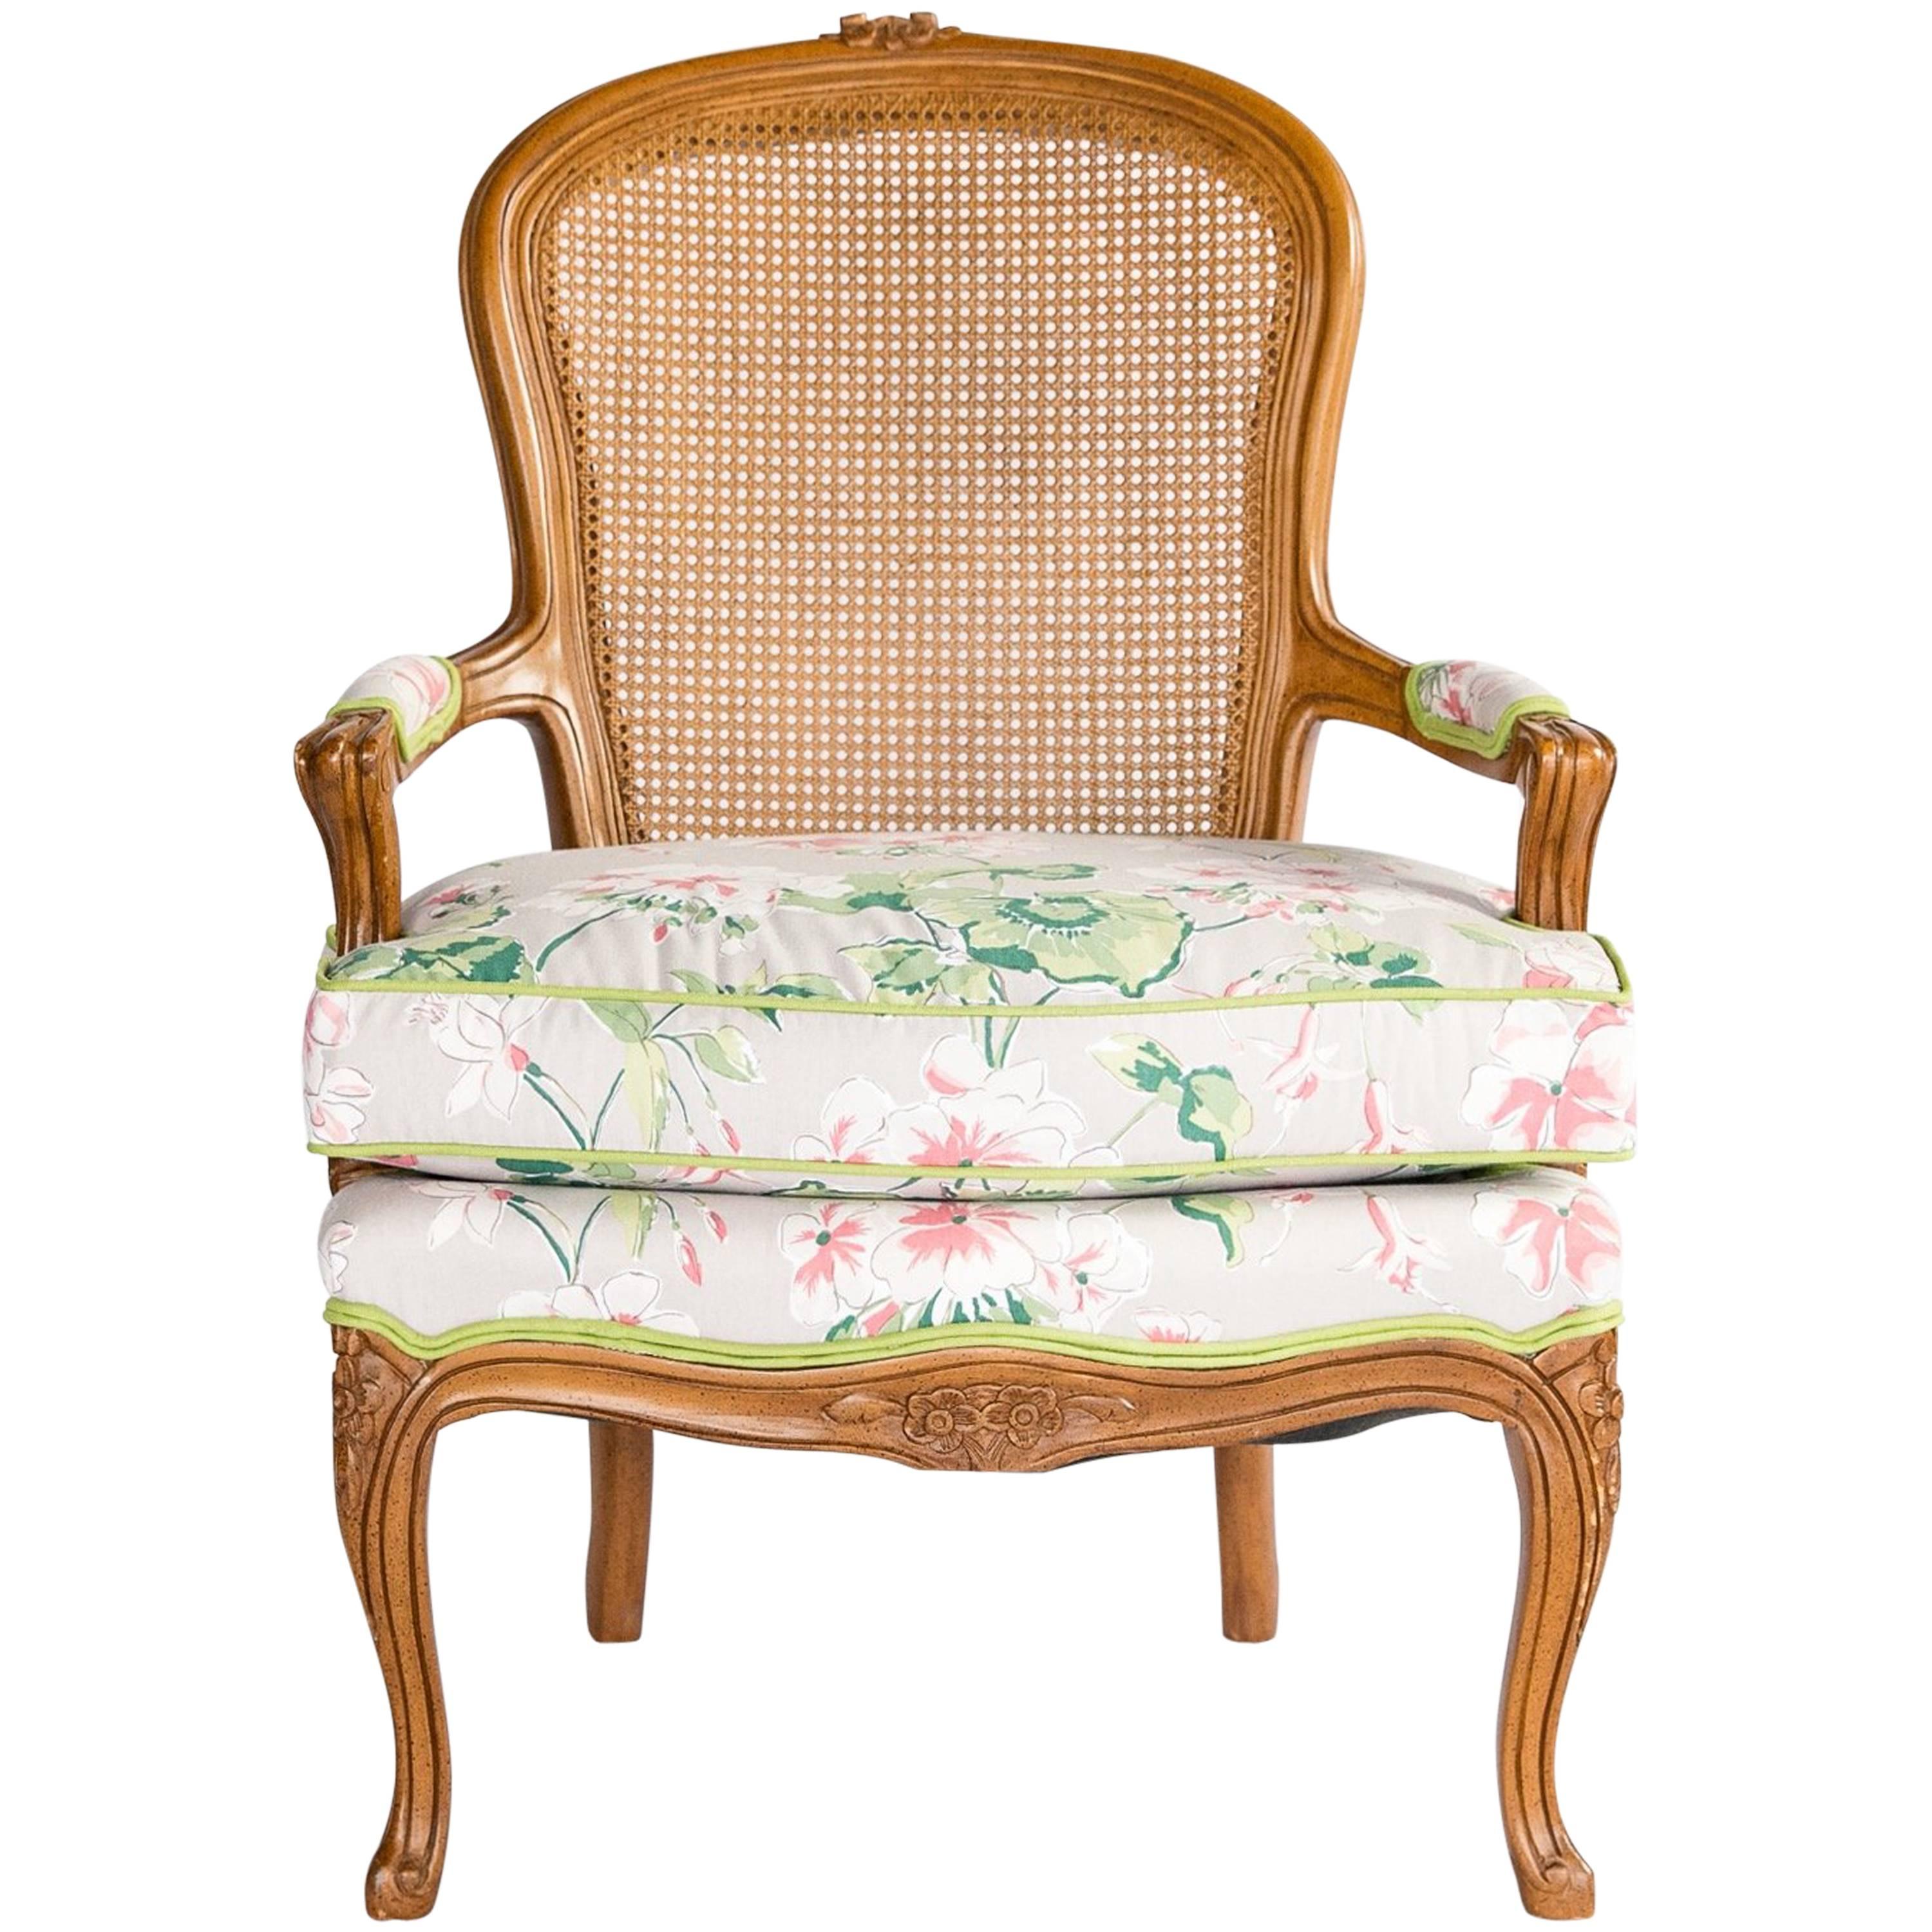 Bergere Chair with Floral Upholstery, 1960s For Sale